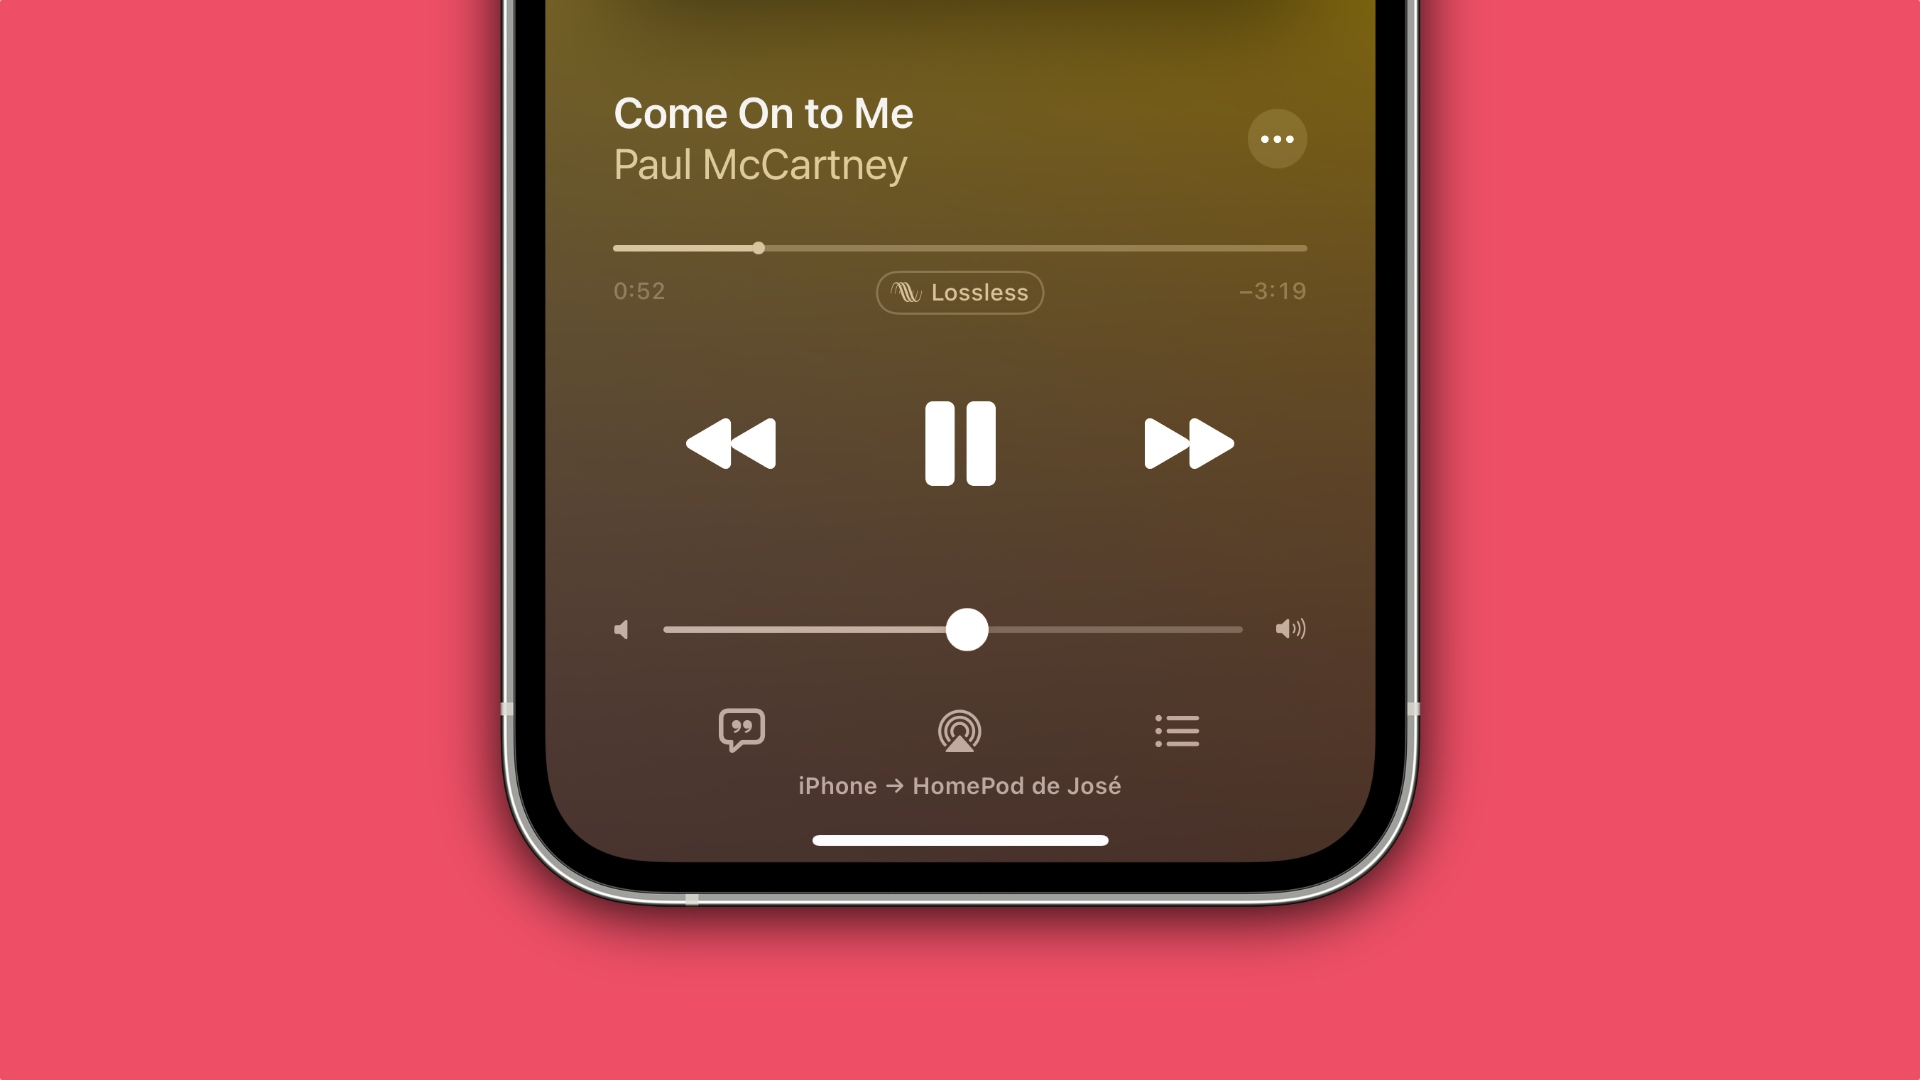 iOS allows users to songs on Music Lossless from iPhone to HomePod - 9to5Mac